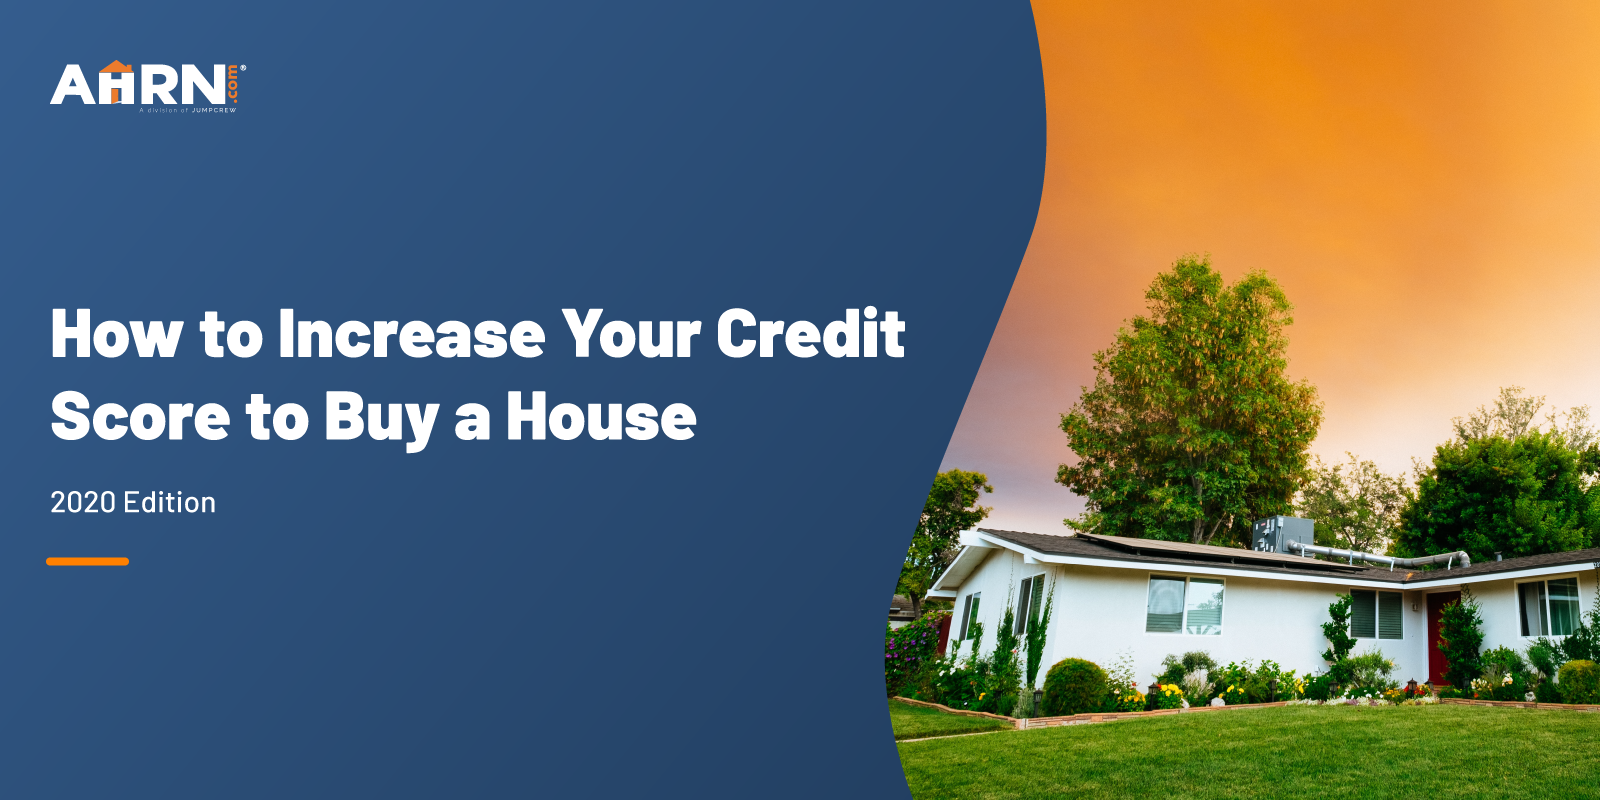 what should credit be to buy a house